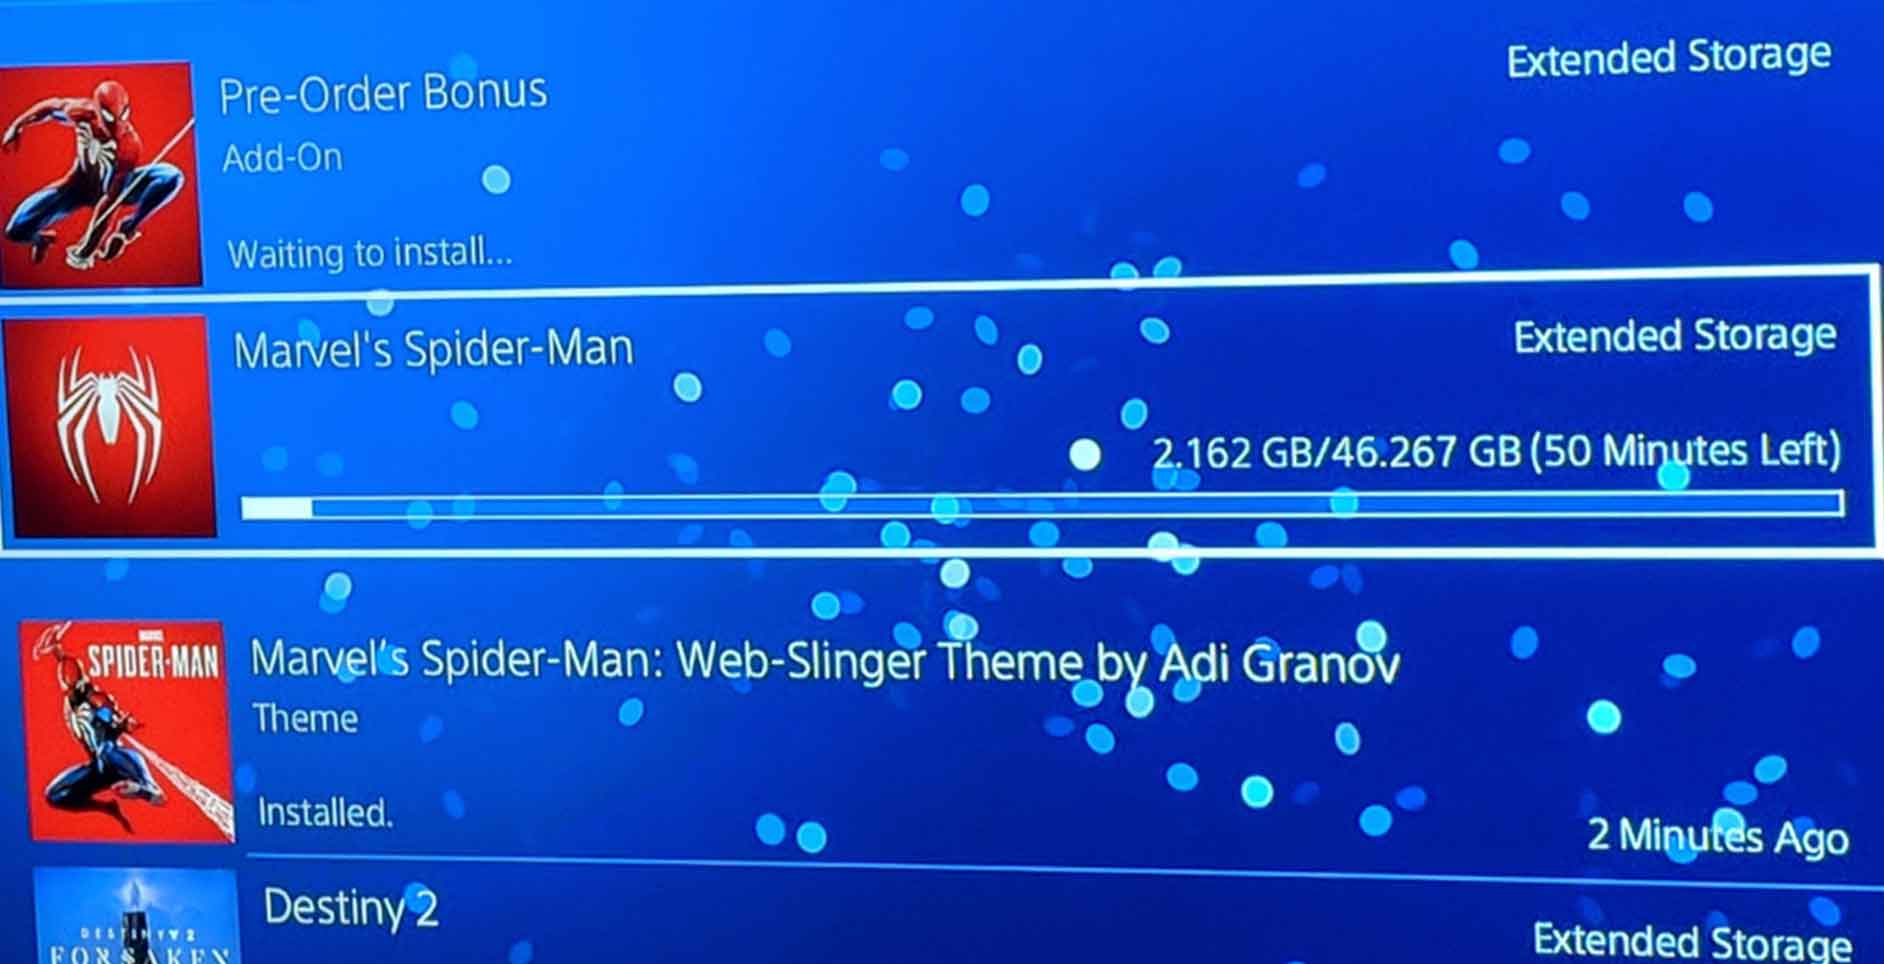 Audaz grande Artes literarias Spider-Man Has A Really Long Install Time And People Just Want To Play